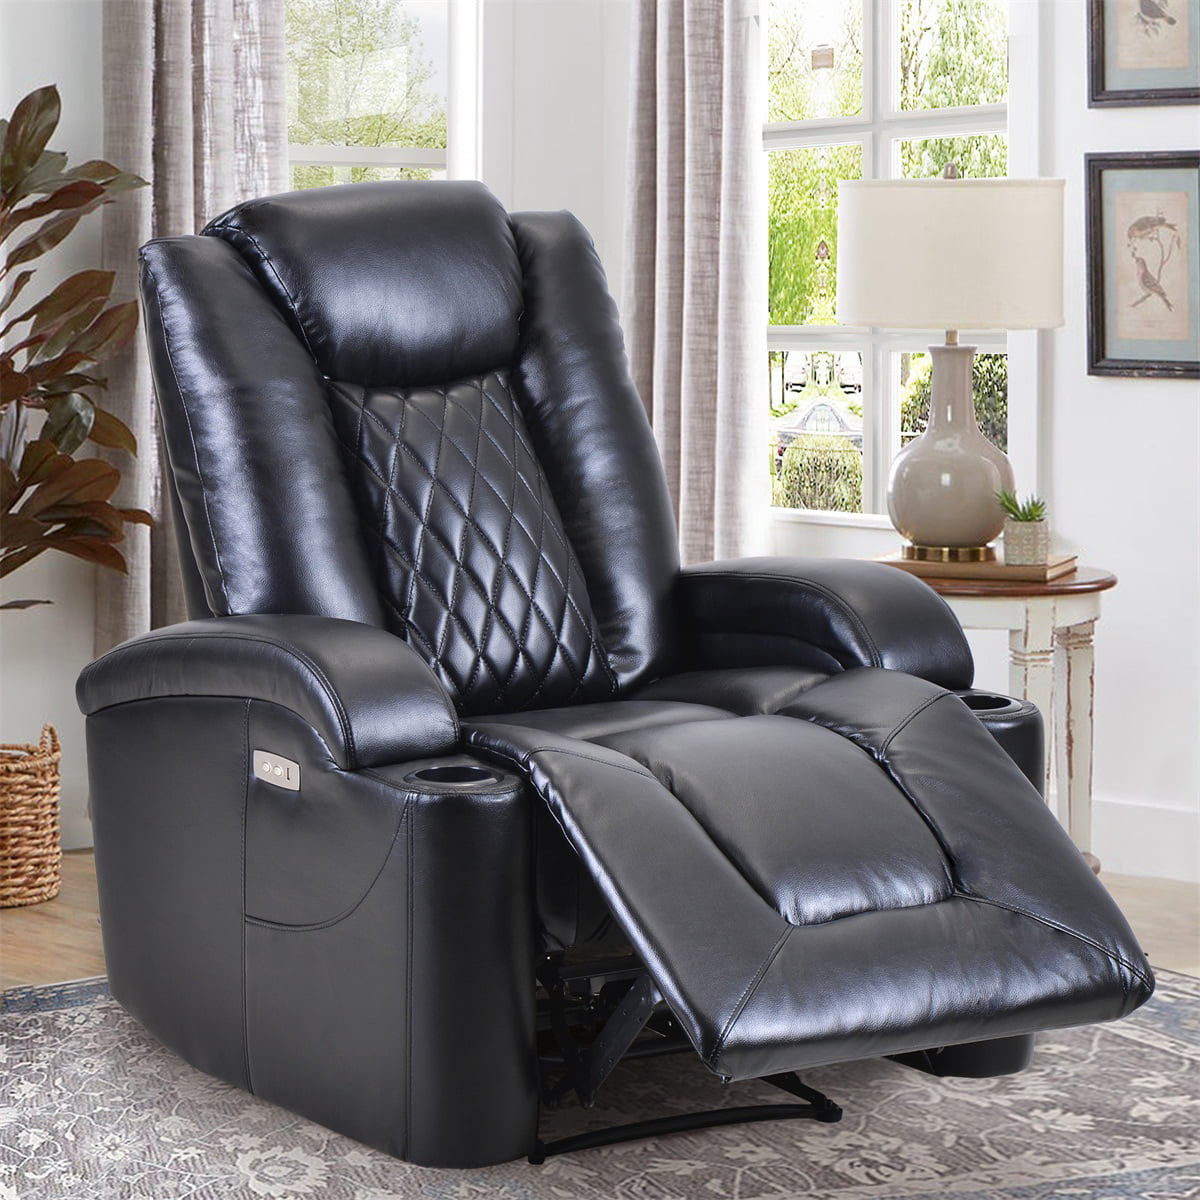 Costco Chair Lift Recliner - Electric Lift Recliner Chair for Elderly